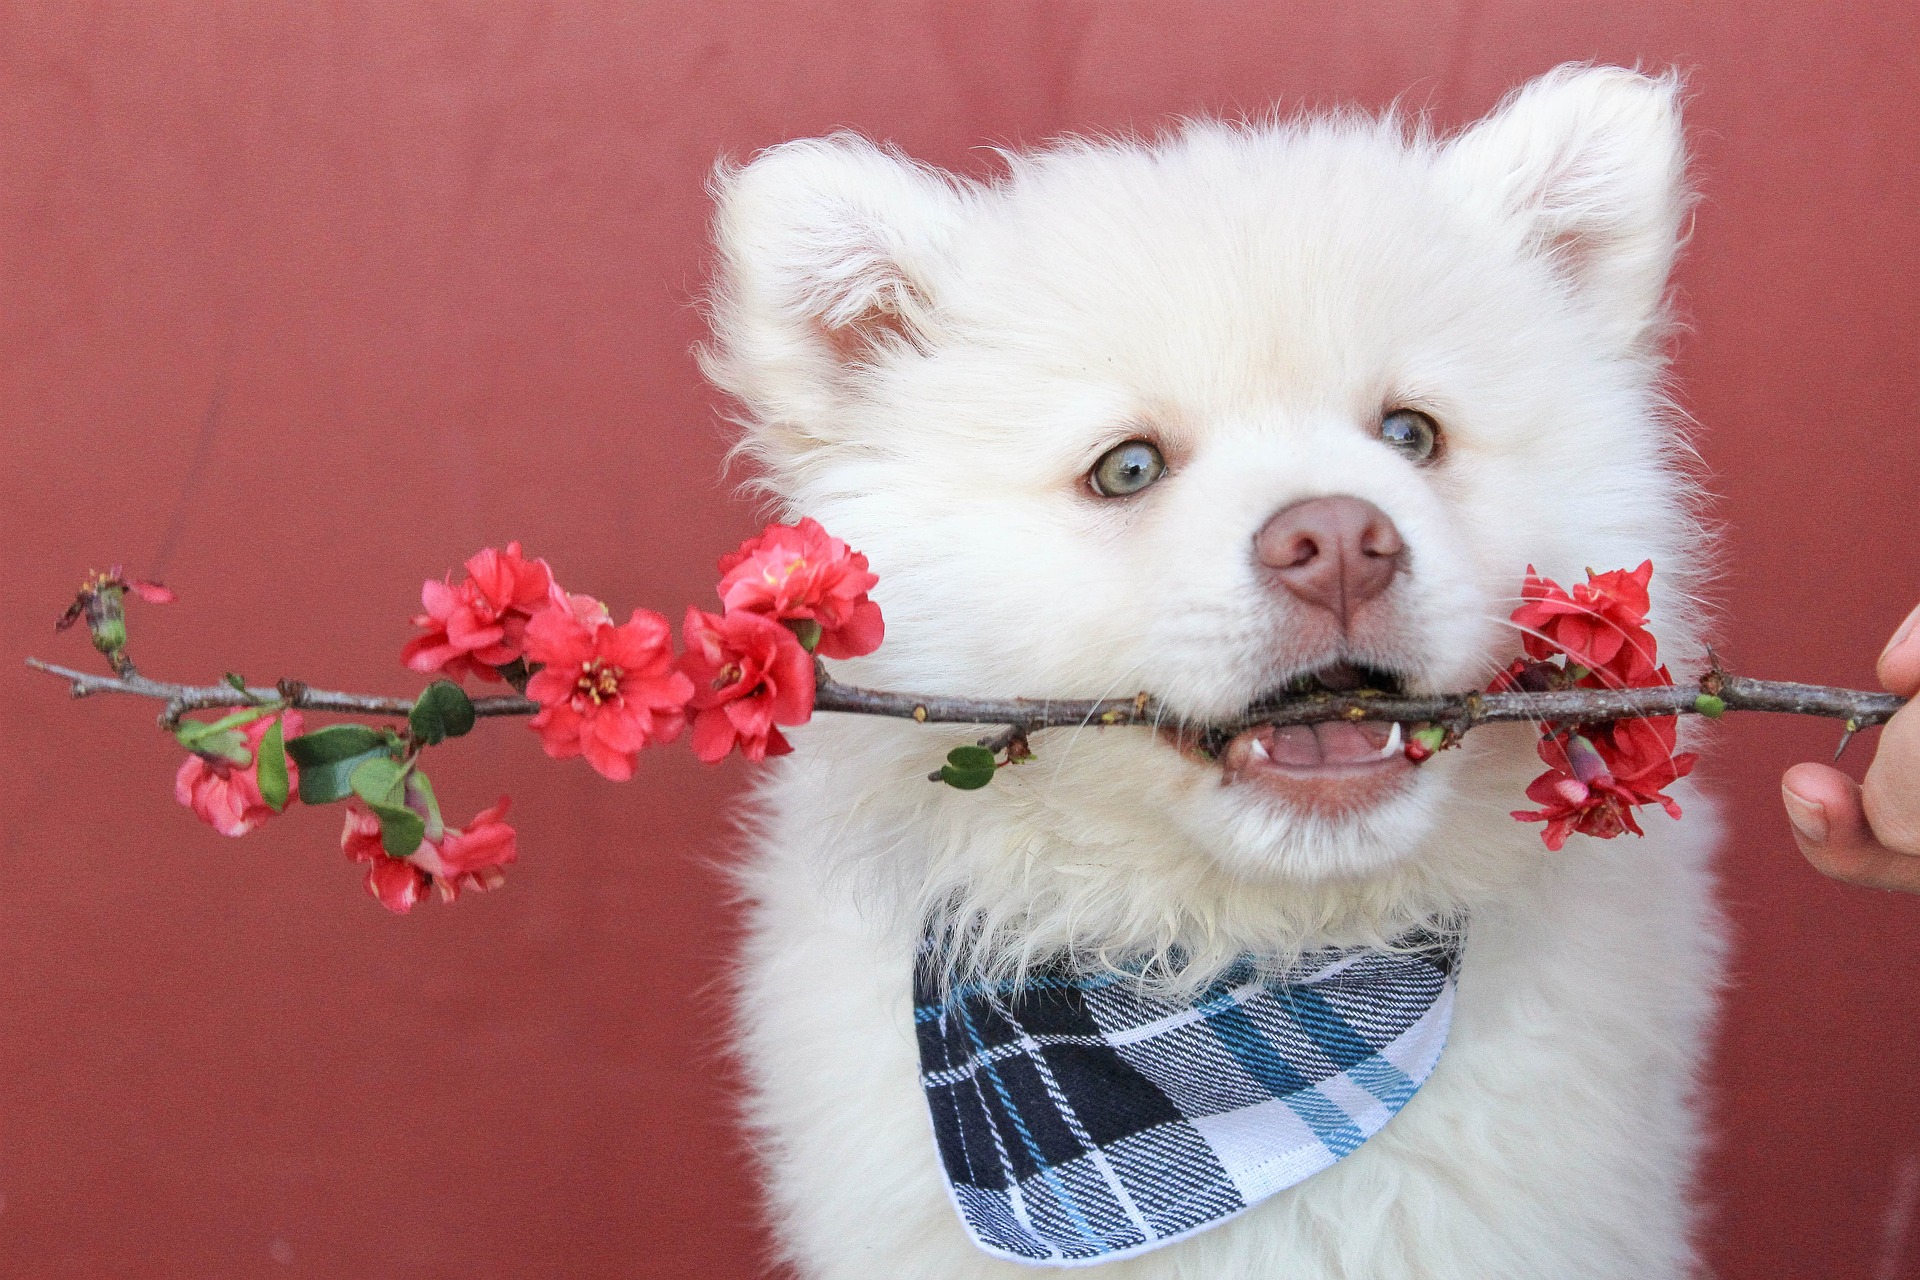 White dog wearing a blue and white bandana holding a branch with flowers in its mouth